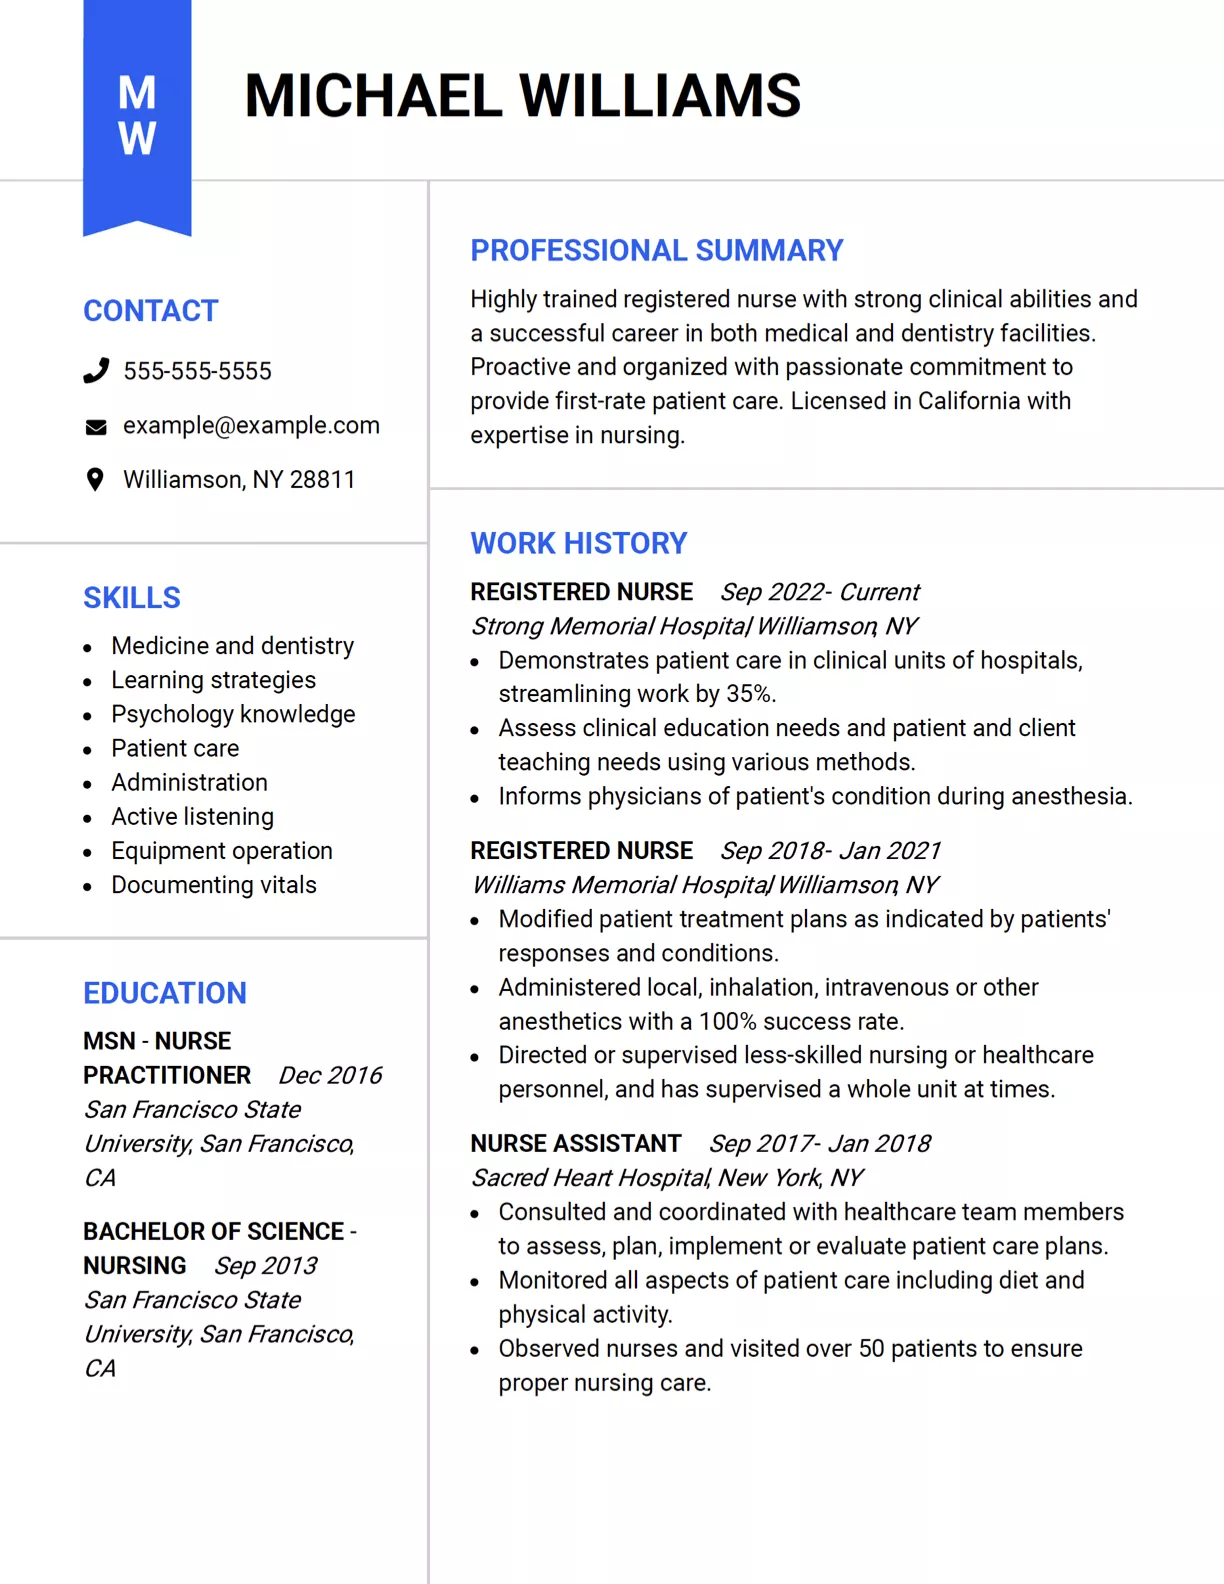 Free Resume Templates The Muse Resume Examples Resume - vrogue.co